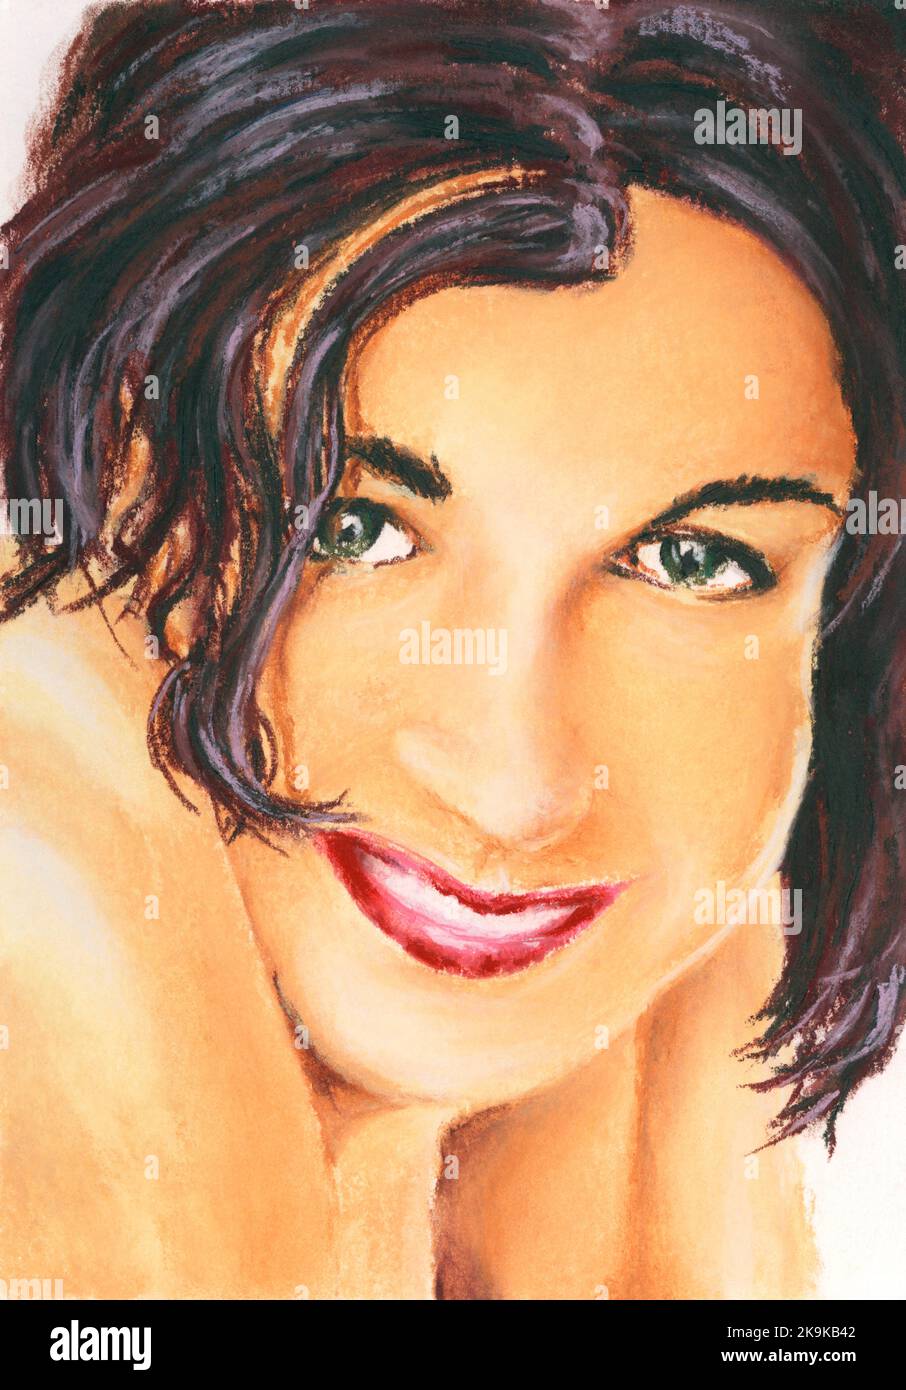 Young woman portrait. Soft pastel on paper. Stock Photo